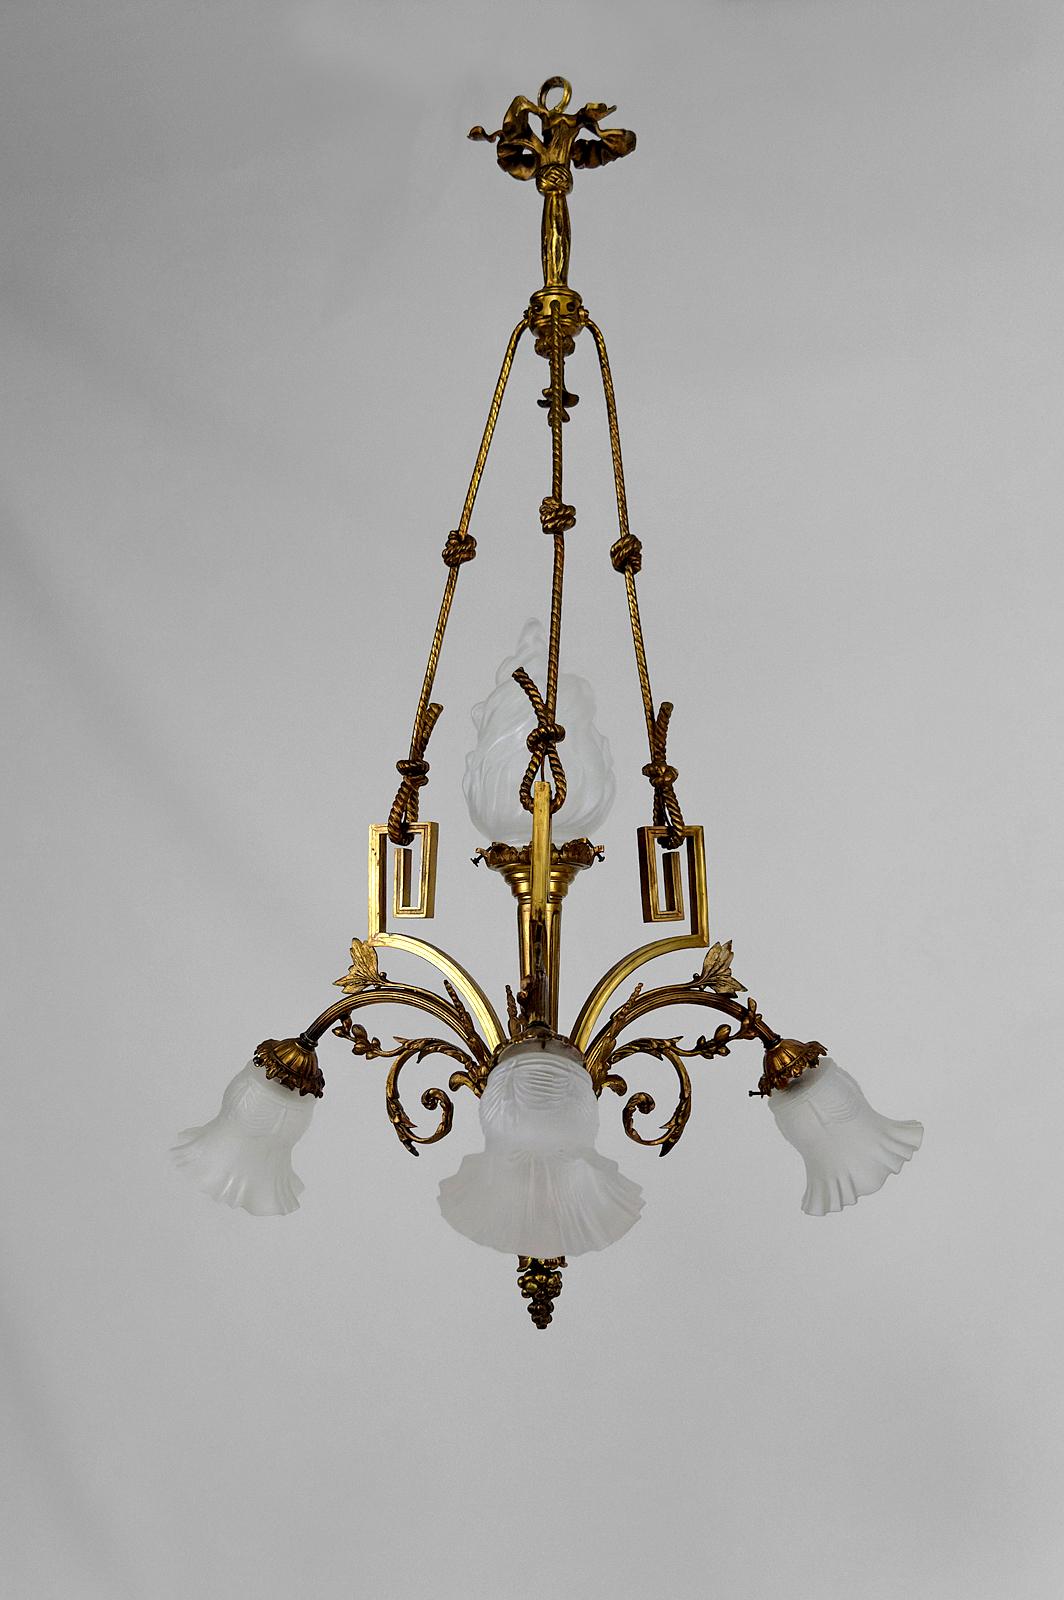 Superb neoclassical / Louis XVI style chandelier.
France, Circa 1900.
4 lights.
In gilded bronze with floral motifs, grapes, torches, rope knots.
Beautiful glassware: flame on the central light, draped over tulips.

Good